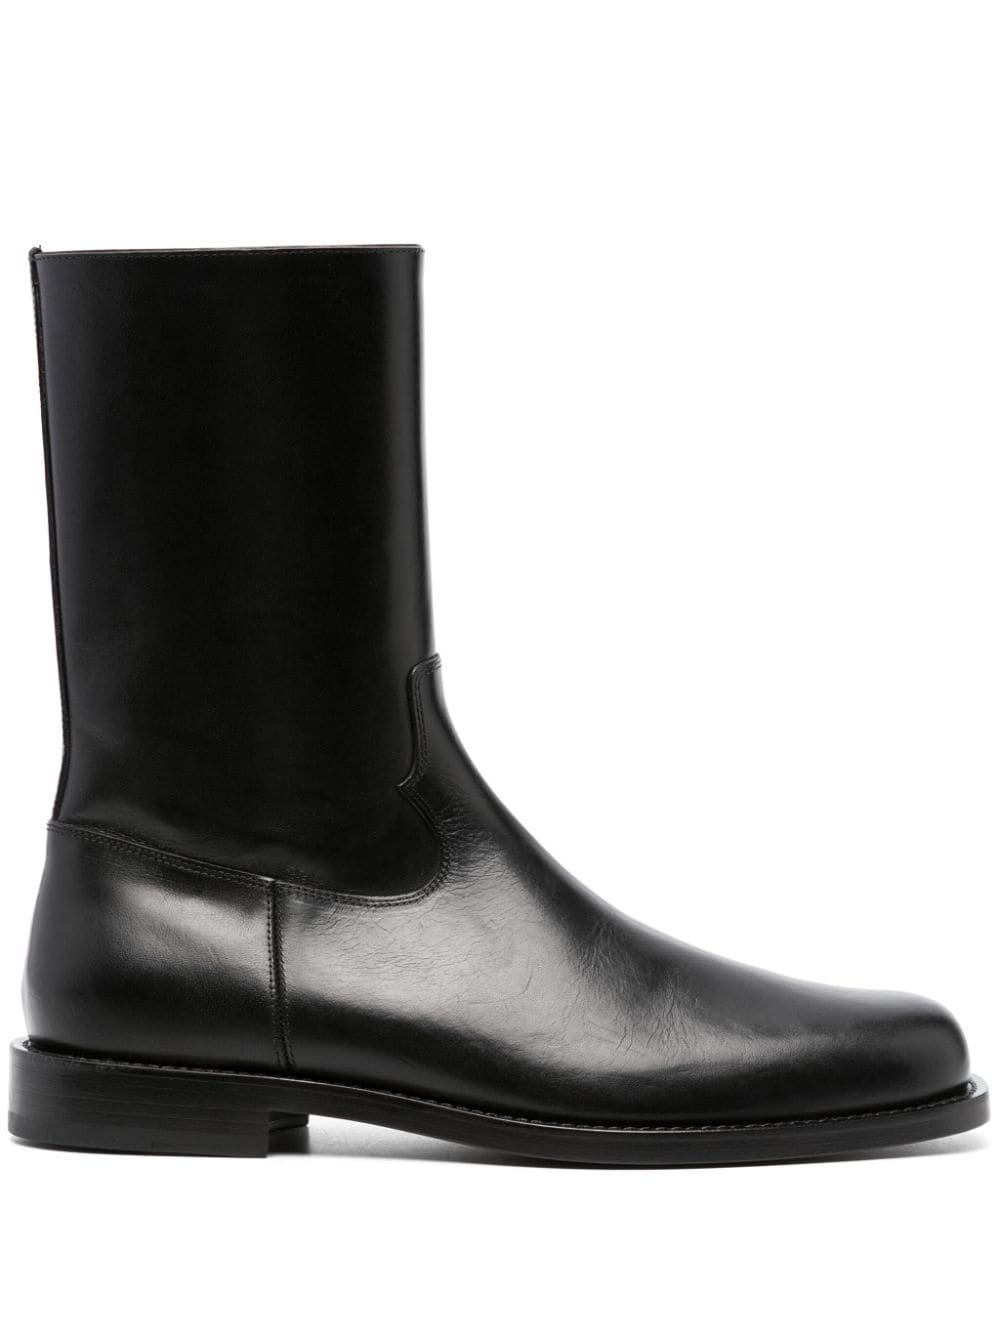 DRIES VAN NOTEN SQUARE-TOE LEATHER BOOTS